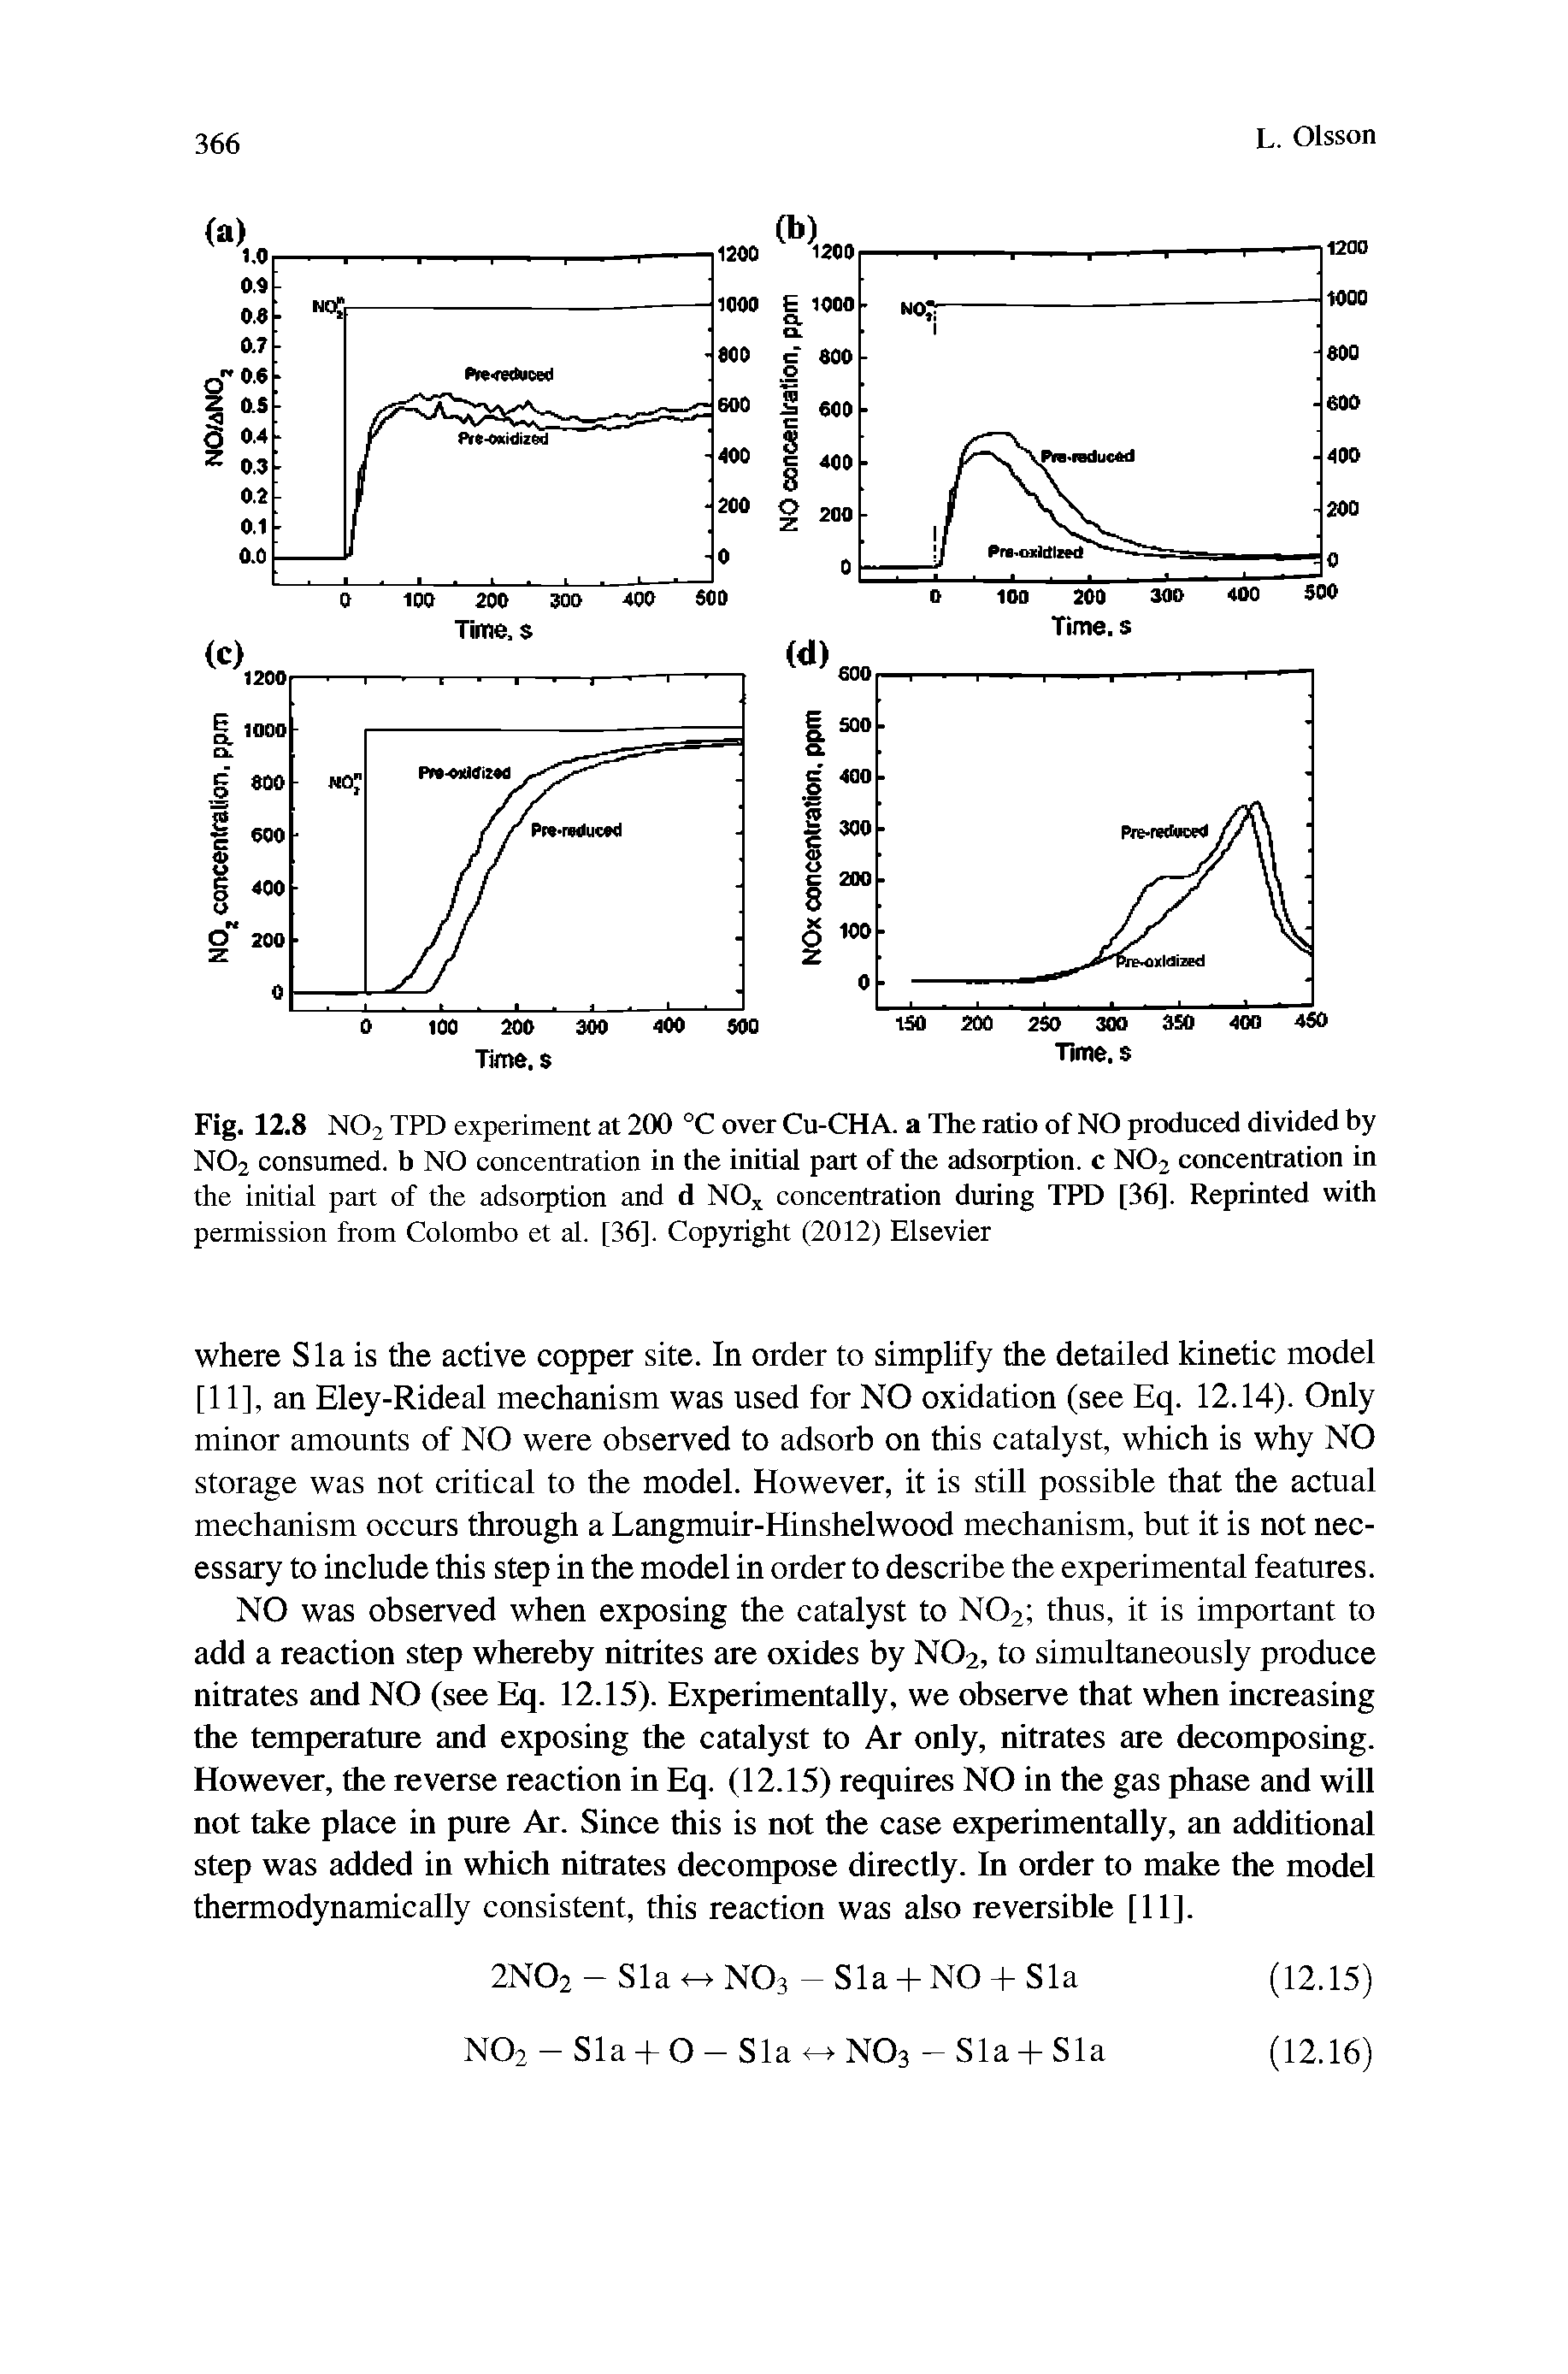 Fig. 12.8 NO2 TPD experiment at 200 °C over Cu-CHA. a The ratio of NO produced divided by NO2 consumed, b NO concentration in the initial part of the adsorption, c NO2 concentration in the initial part of the adsorption and d NO concentration during TPD [36]. Reprinted with permission from Colombo et al. [36]. Copyright (2012) Elsevier...